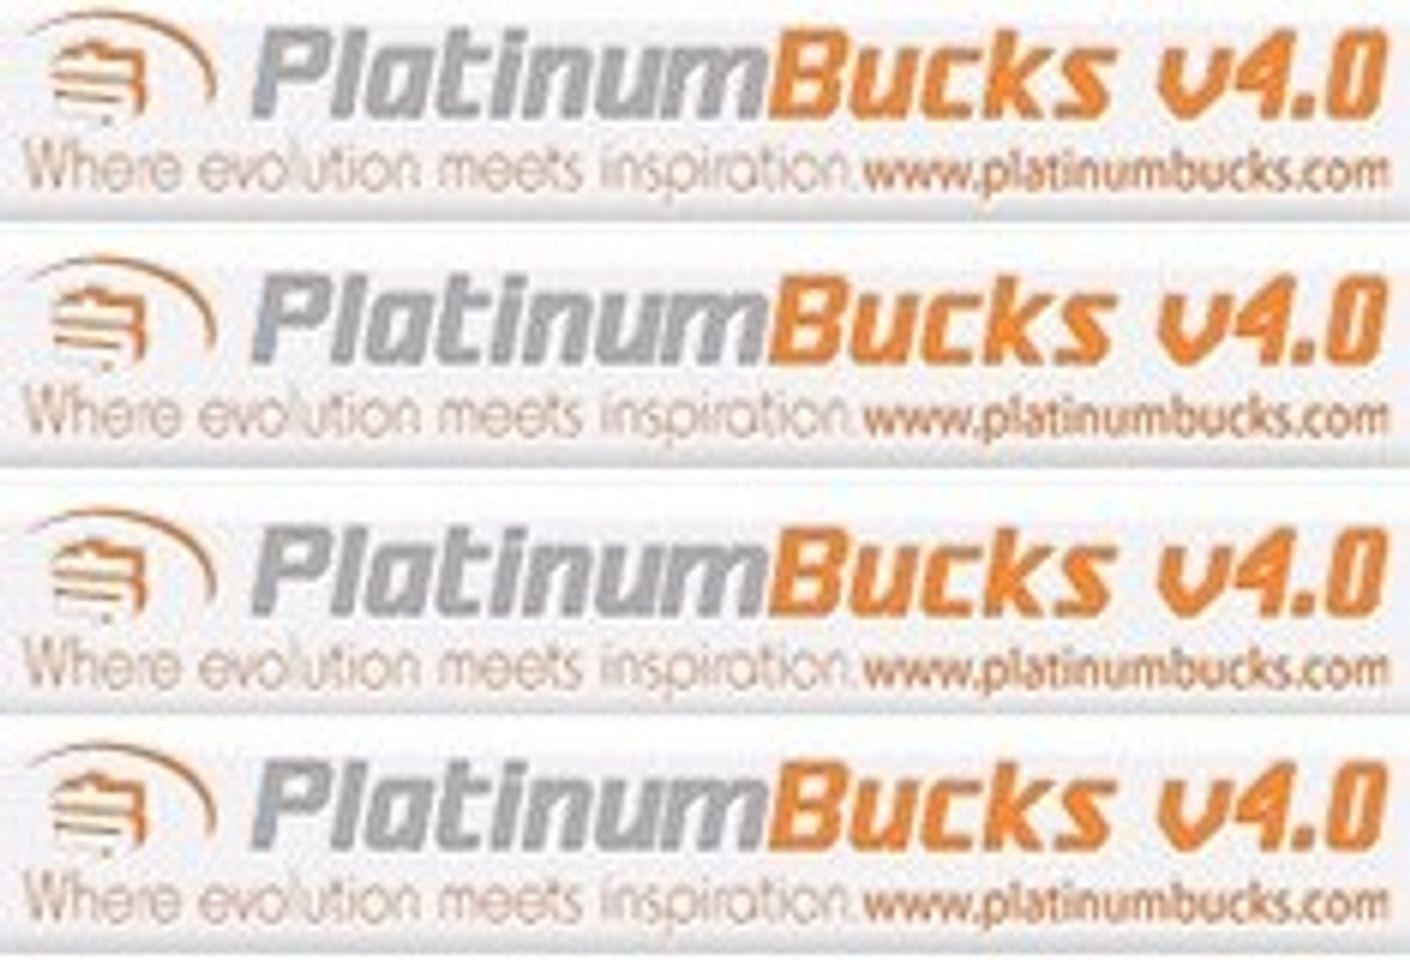 Platinum Bucks Releases Two New Reality Sites